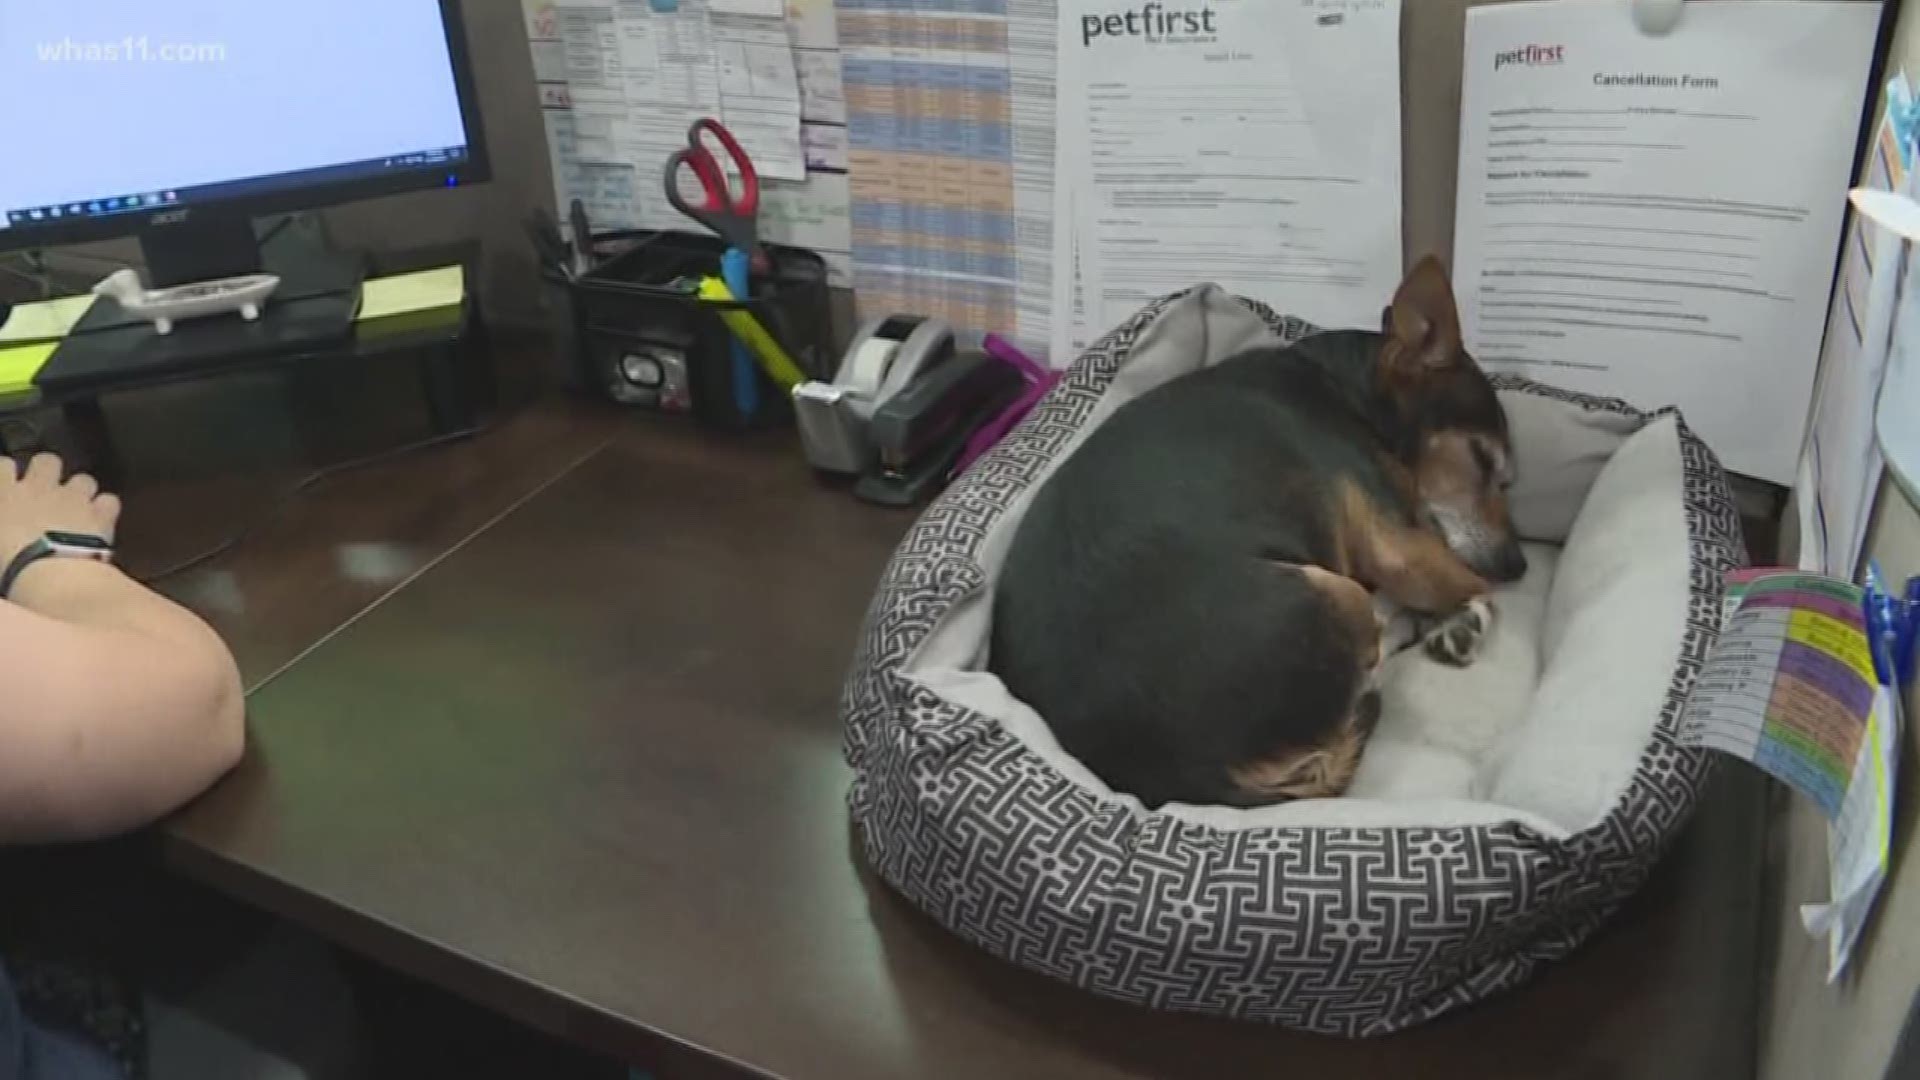 There are several companies that allow you to bring your four-legged friend with you to the office. They say that when you do, you're more productive.